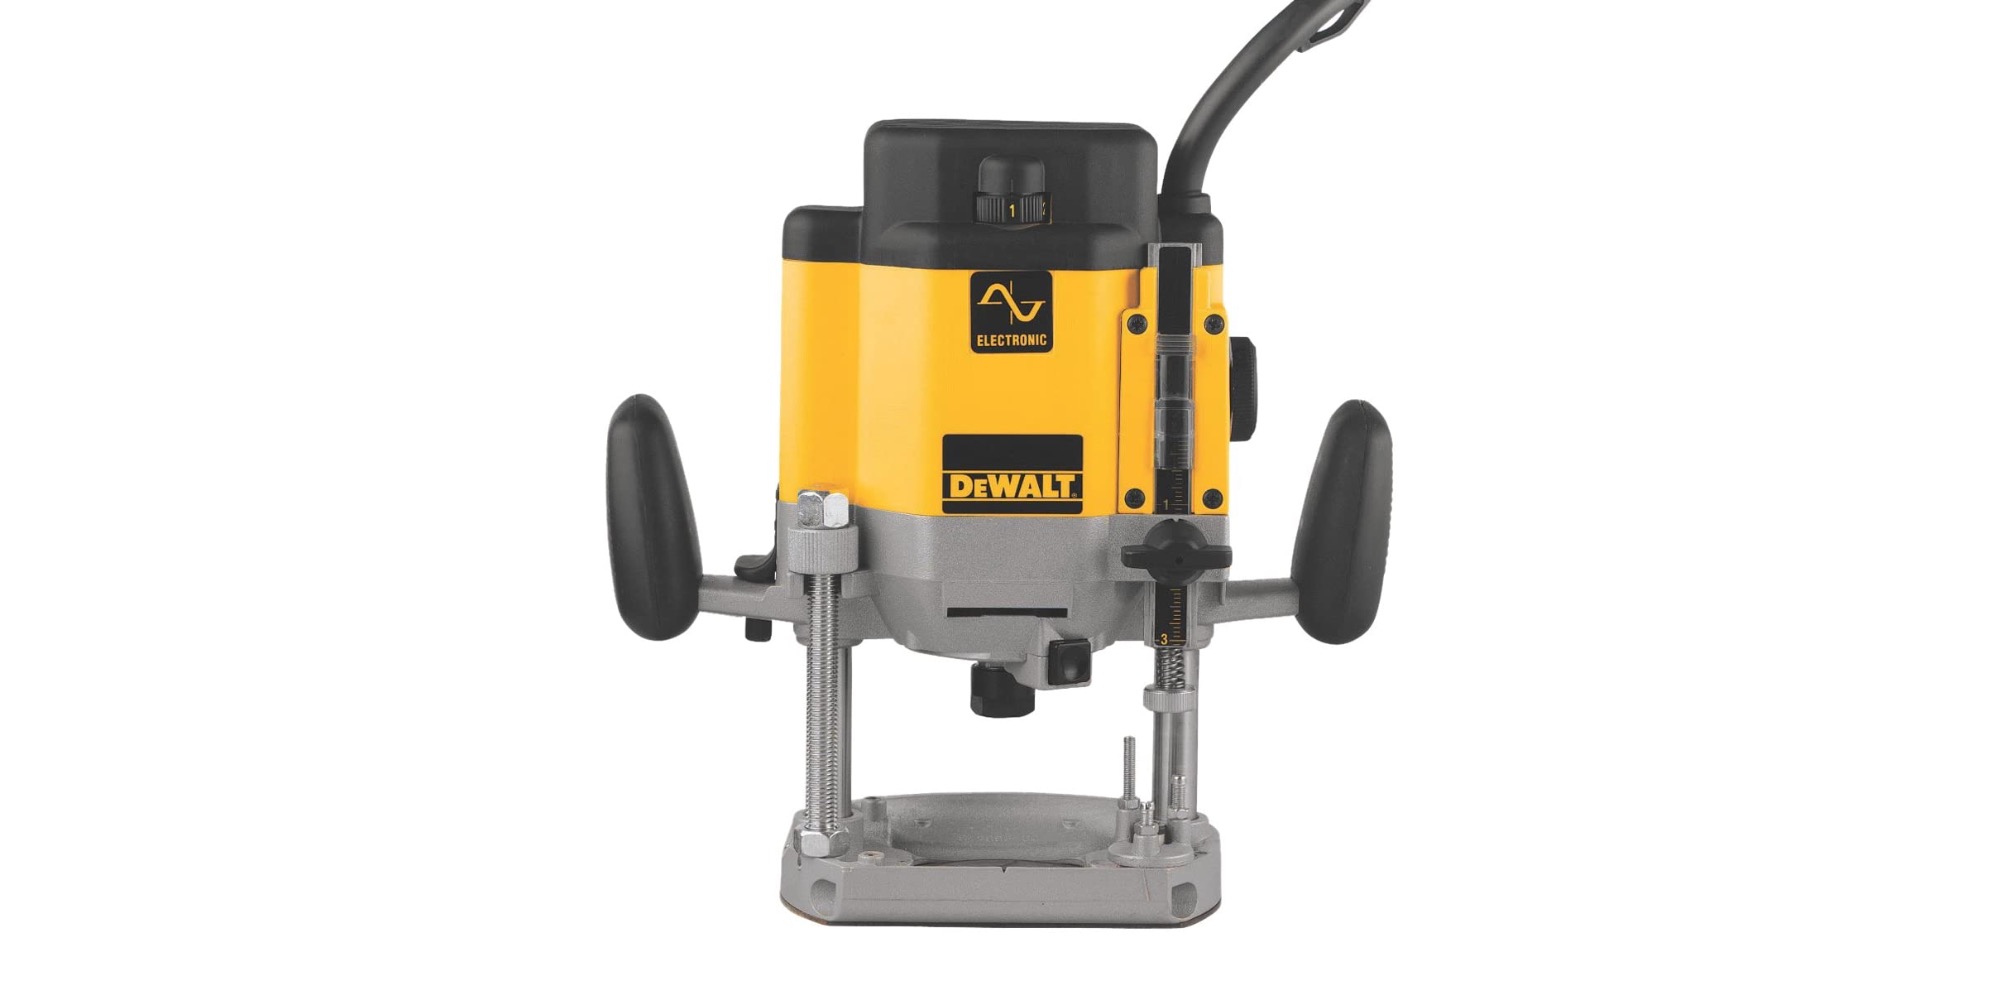 Take woodworking to the next level with DEWALT s Plunge 